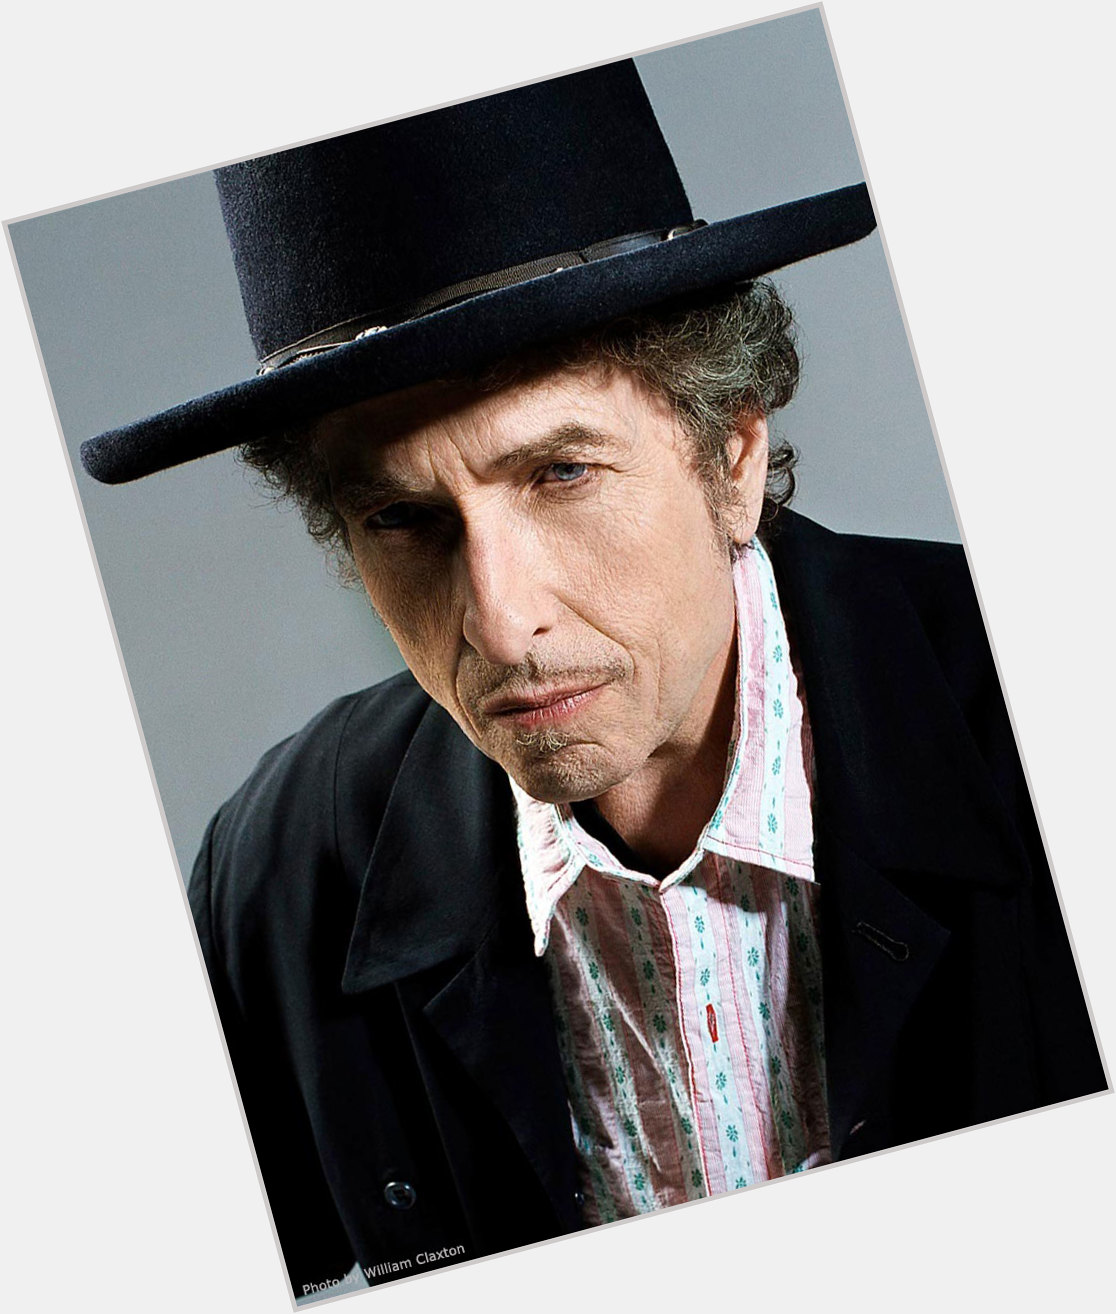 HAPPY BIRTHDAY BOB  DYLAN!

Forever Young (       )  